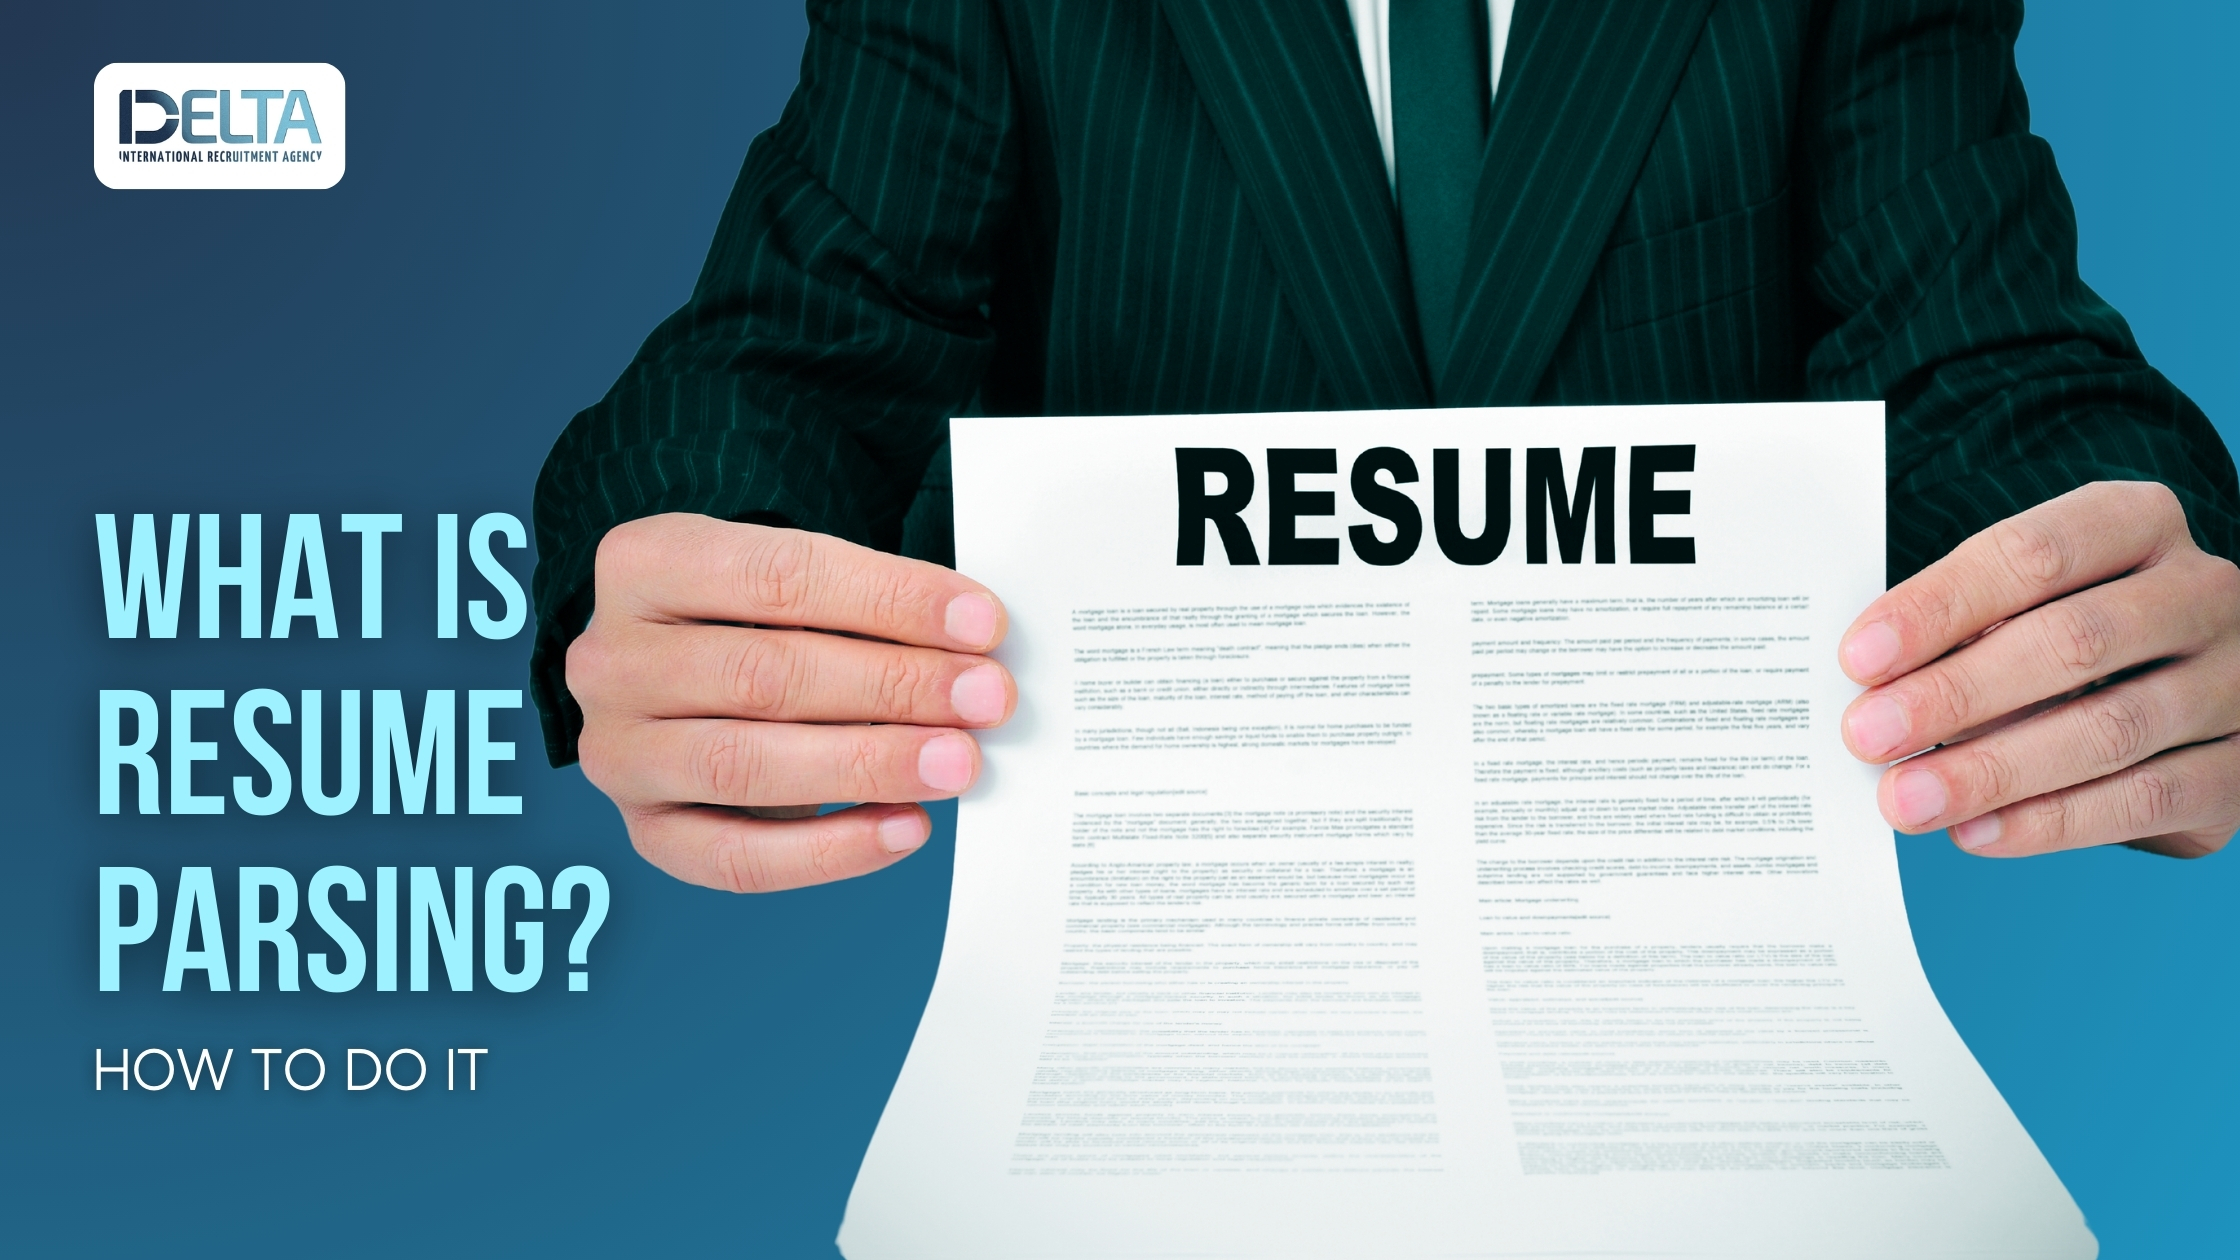 What Is Resume Parsing? How to do it